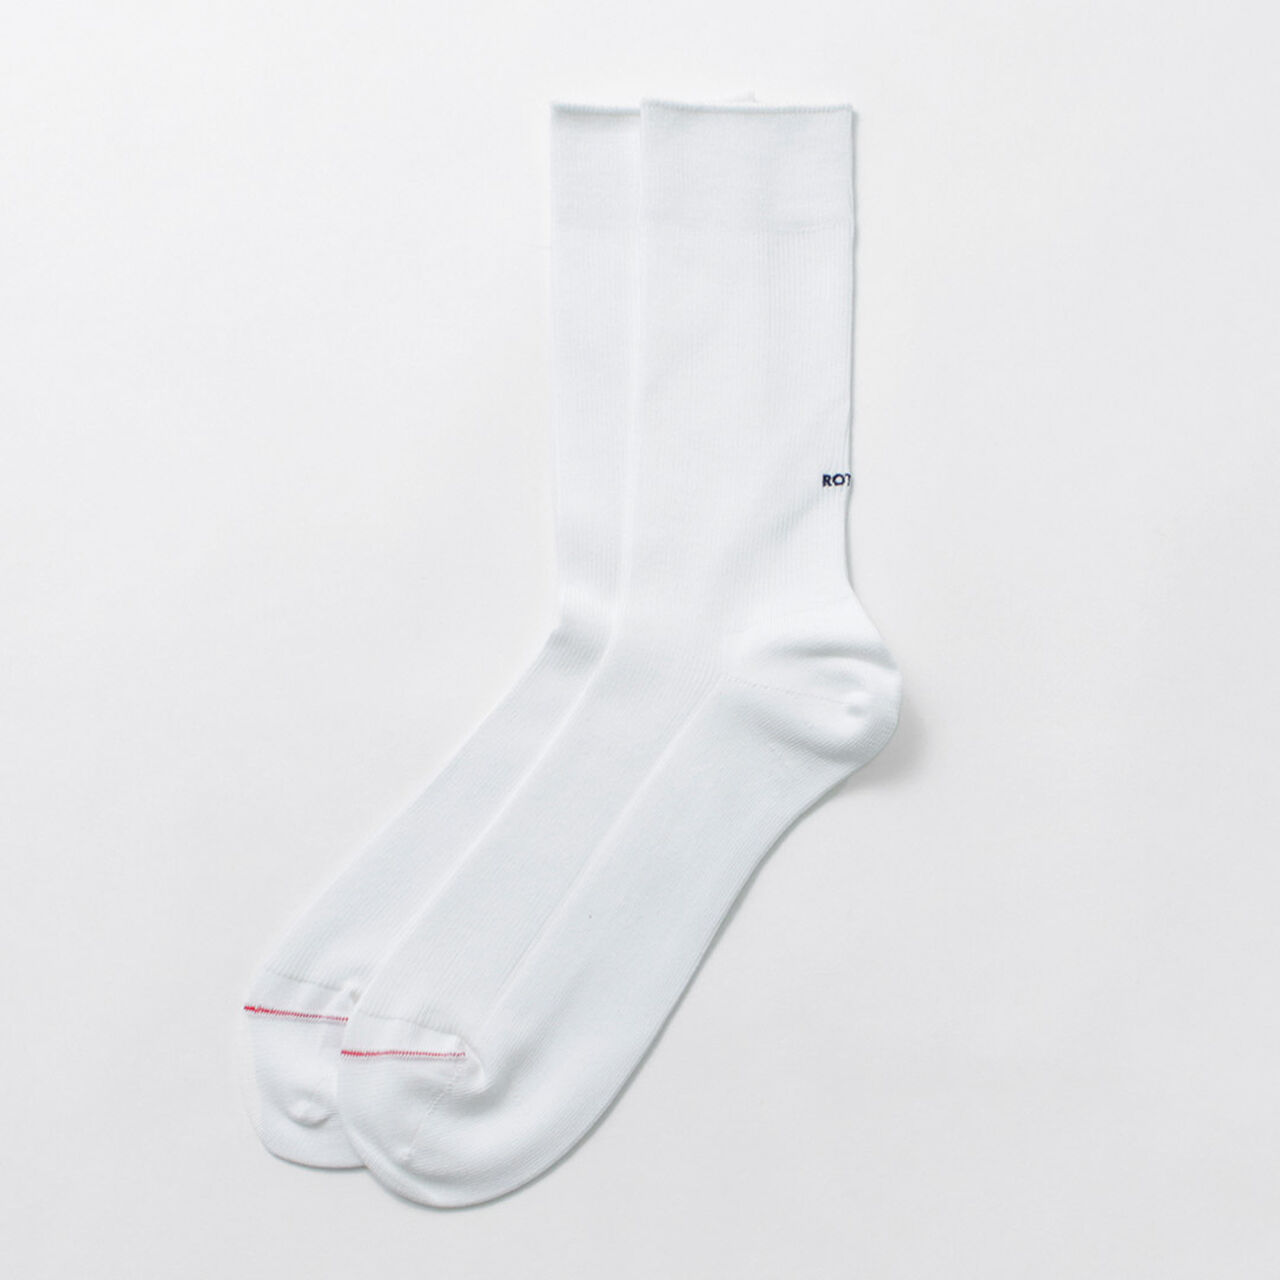 Organic Cotton & Recycled Polyester Ribbed Crew Socks,White, large image number 0